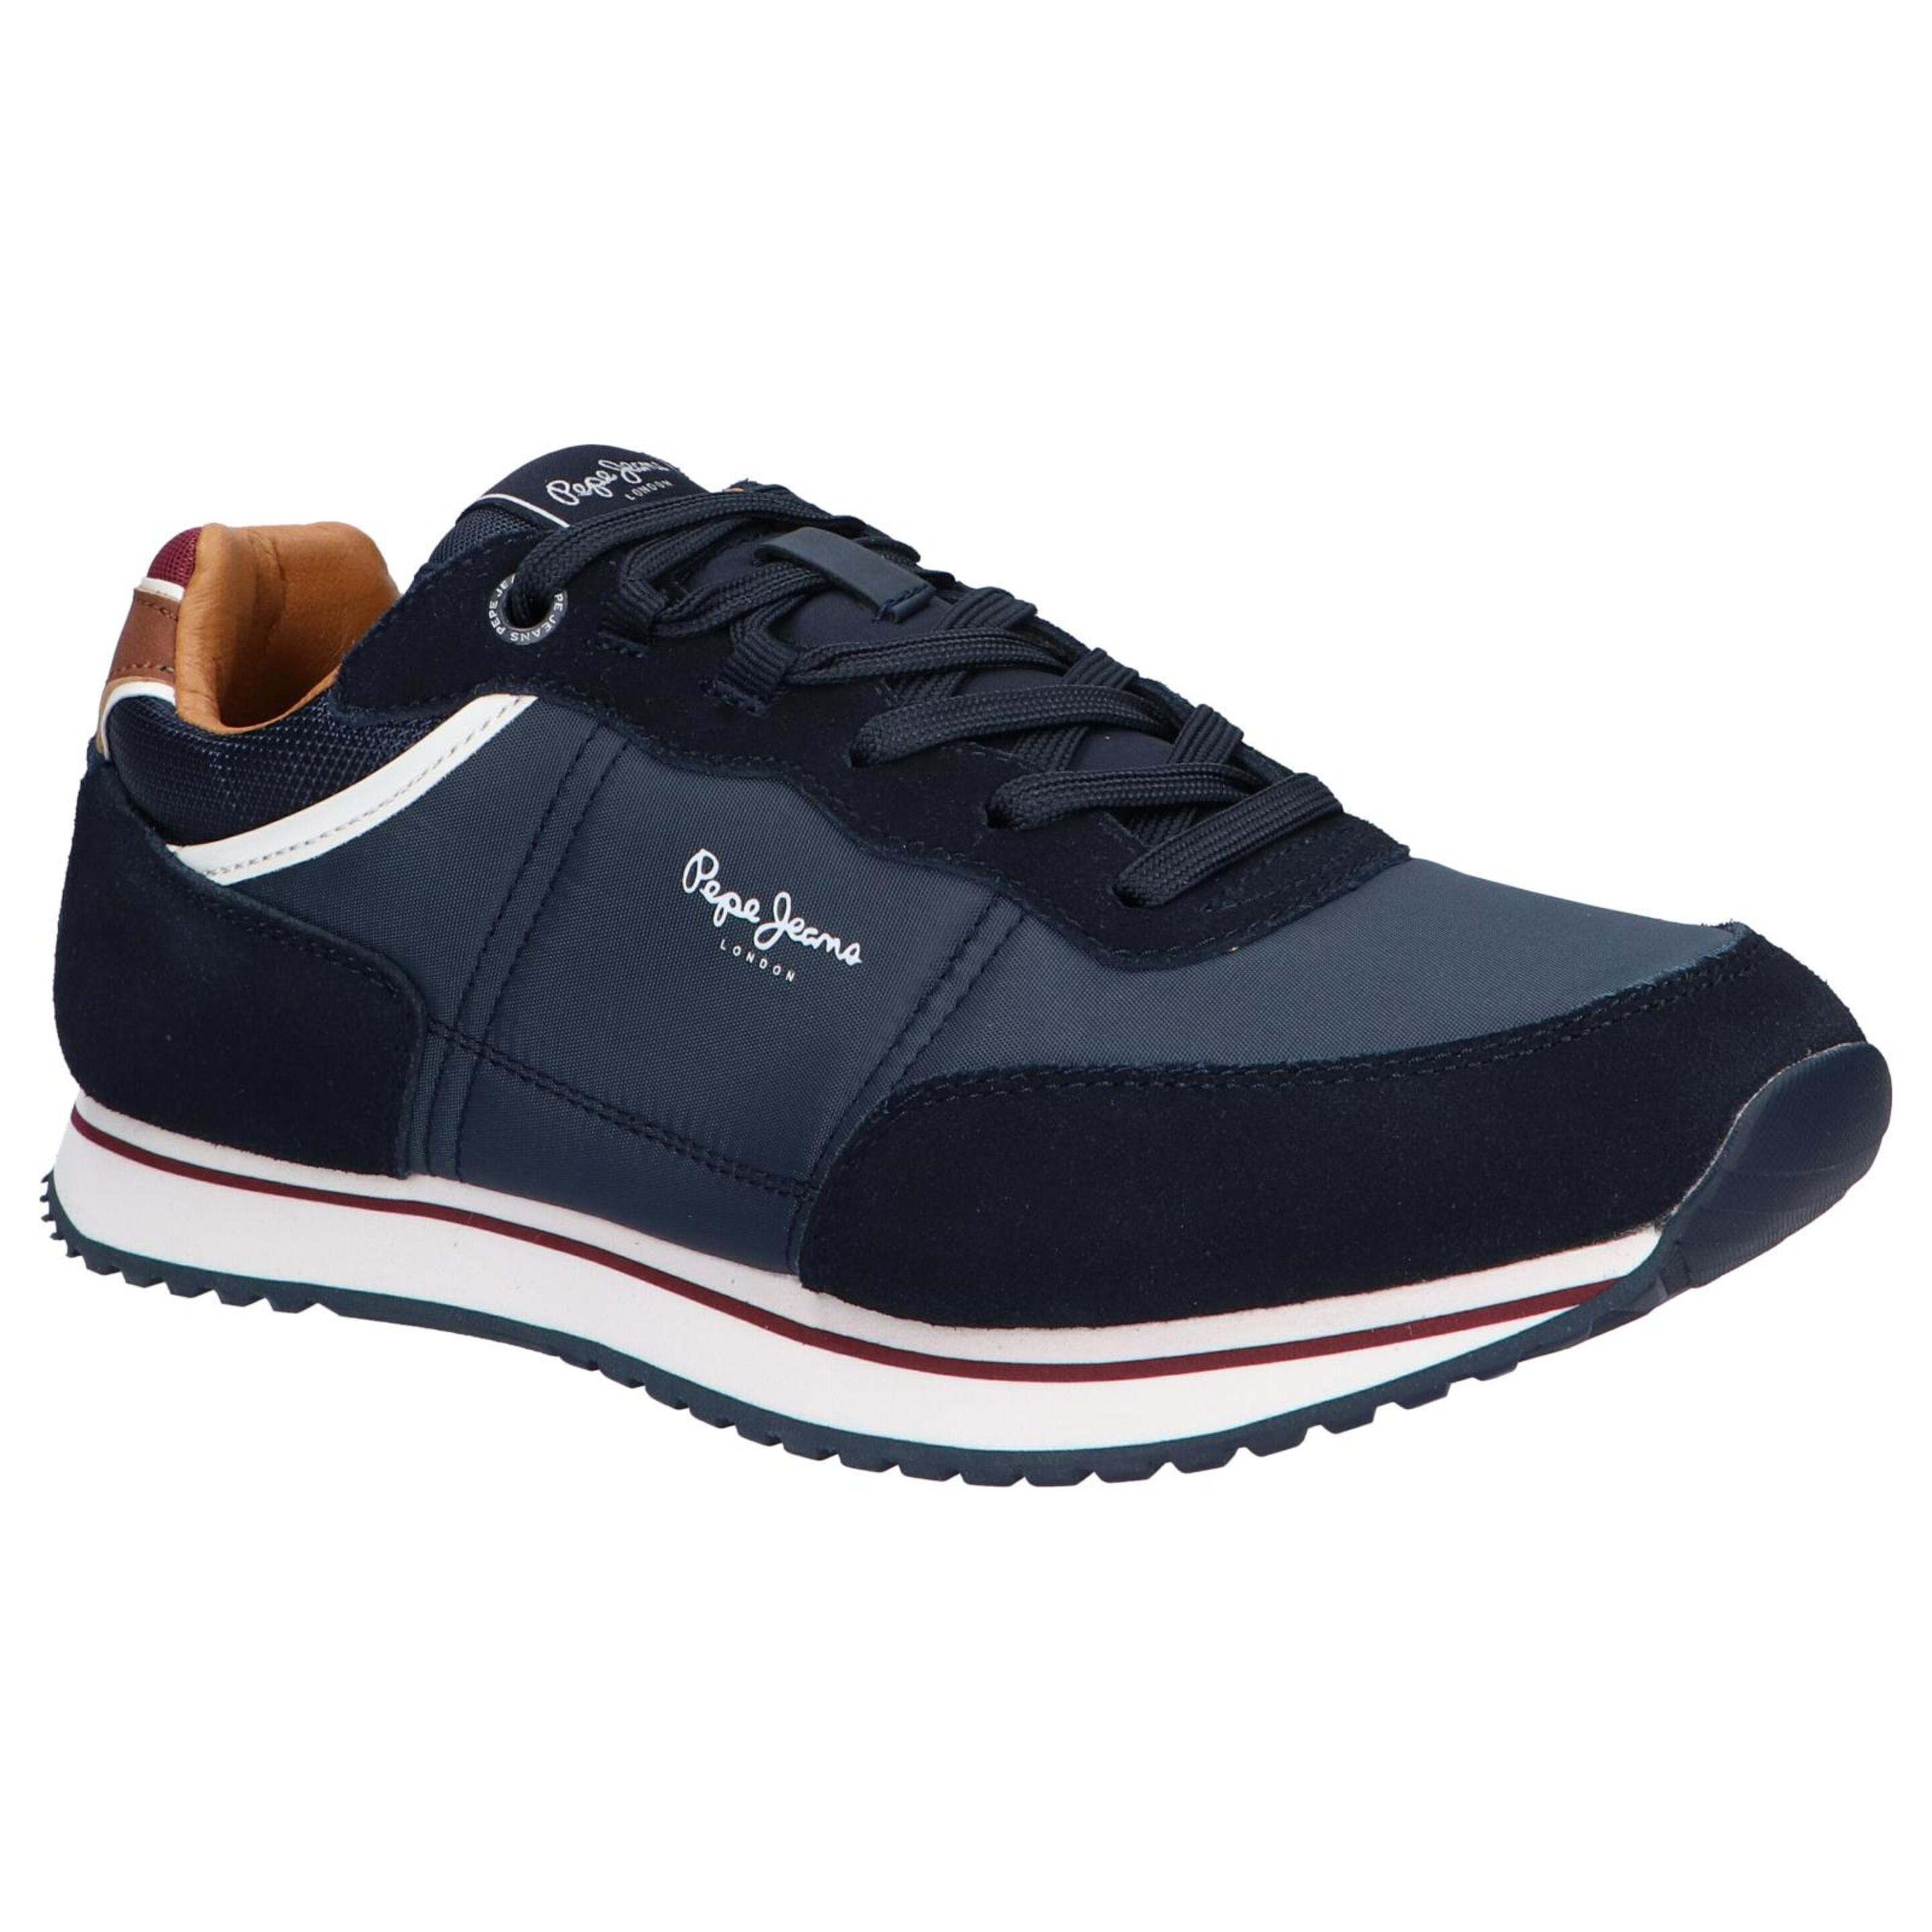 Sapatilhas Pepe Jeans - Azul | Sport Zone MKP